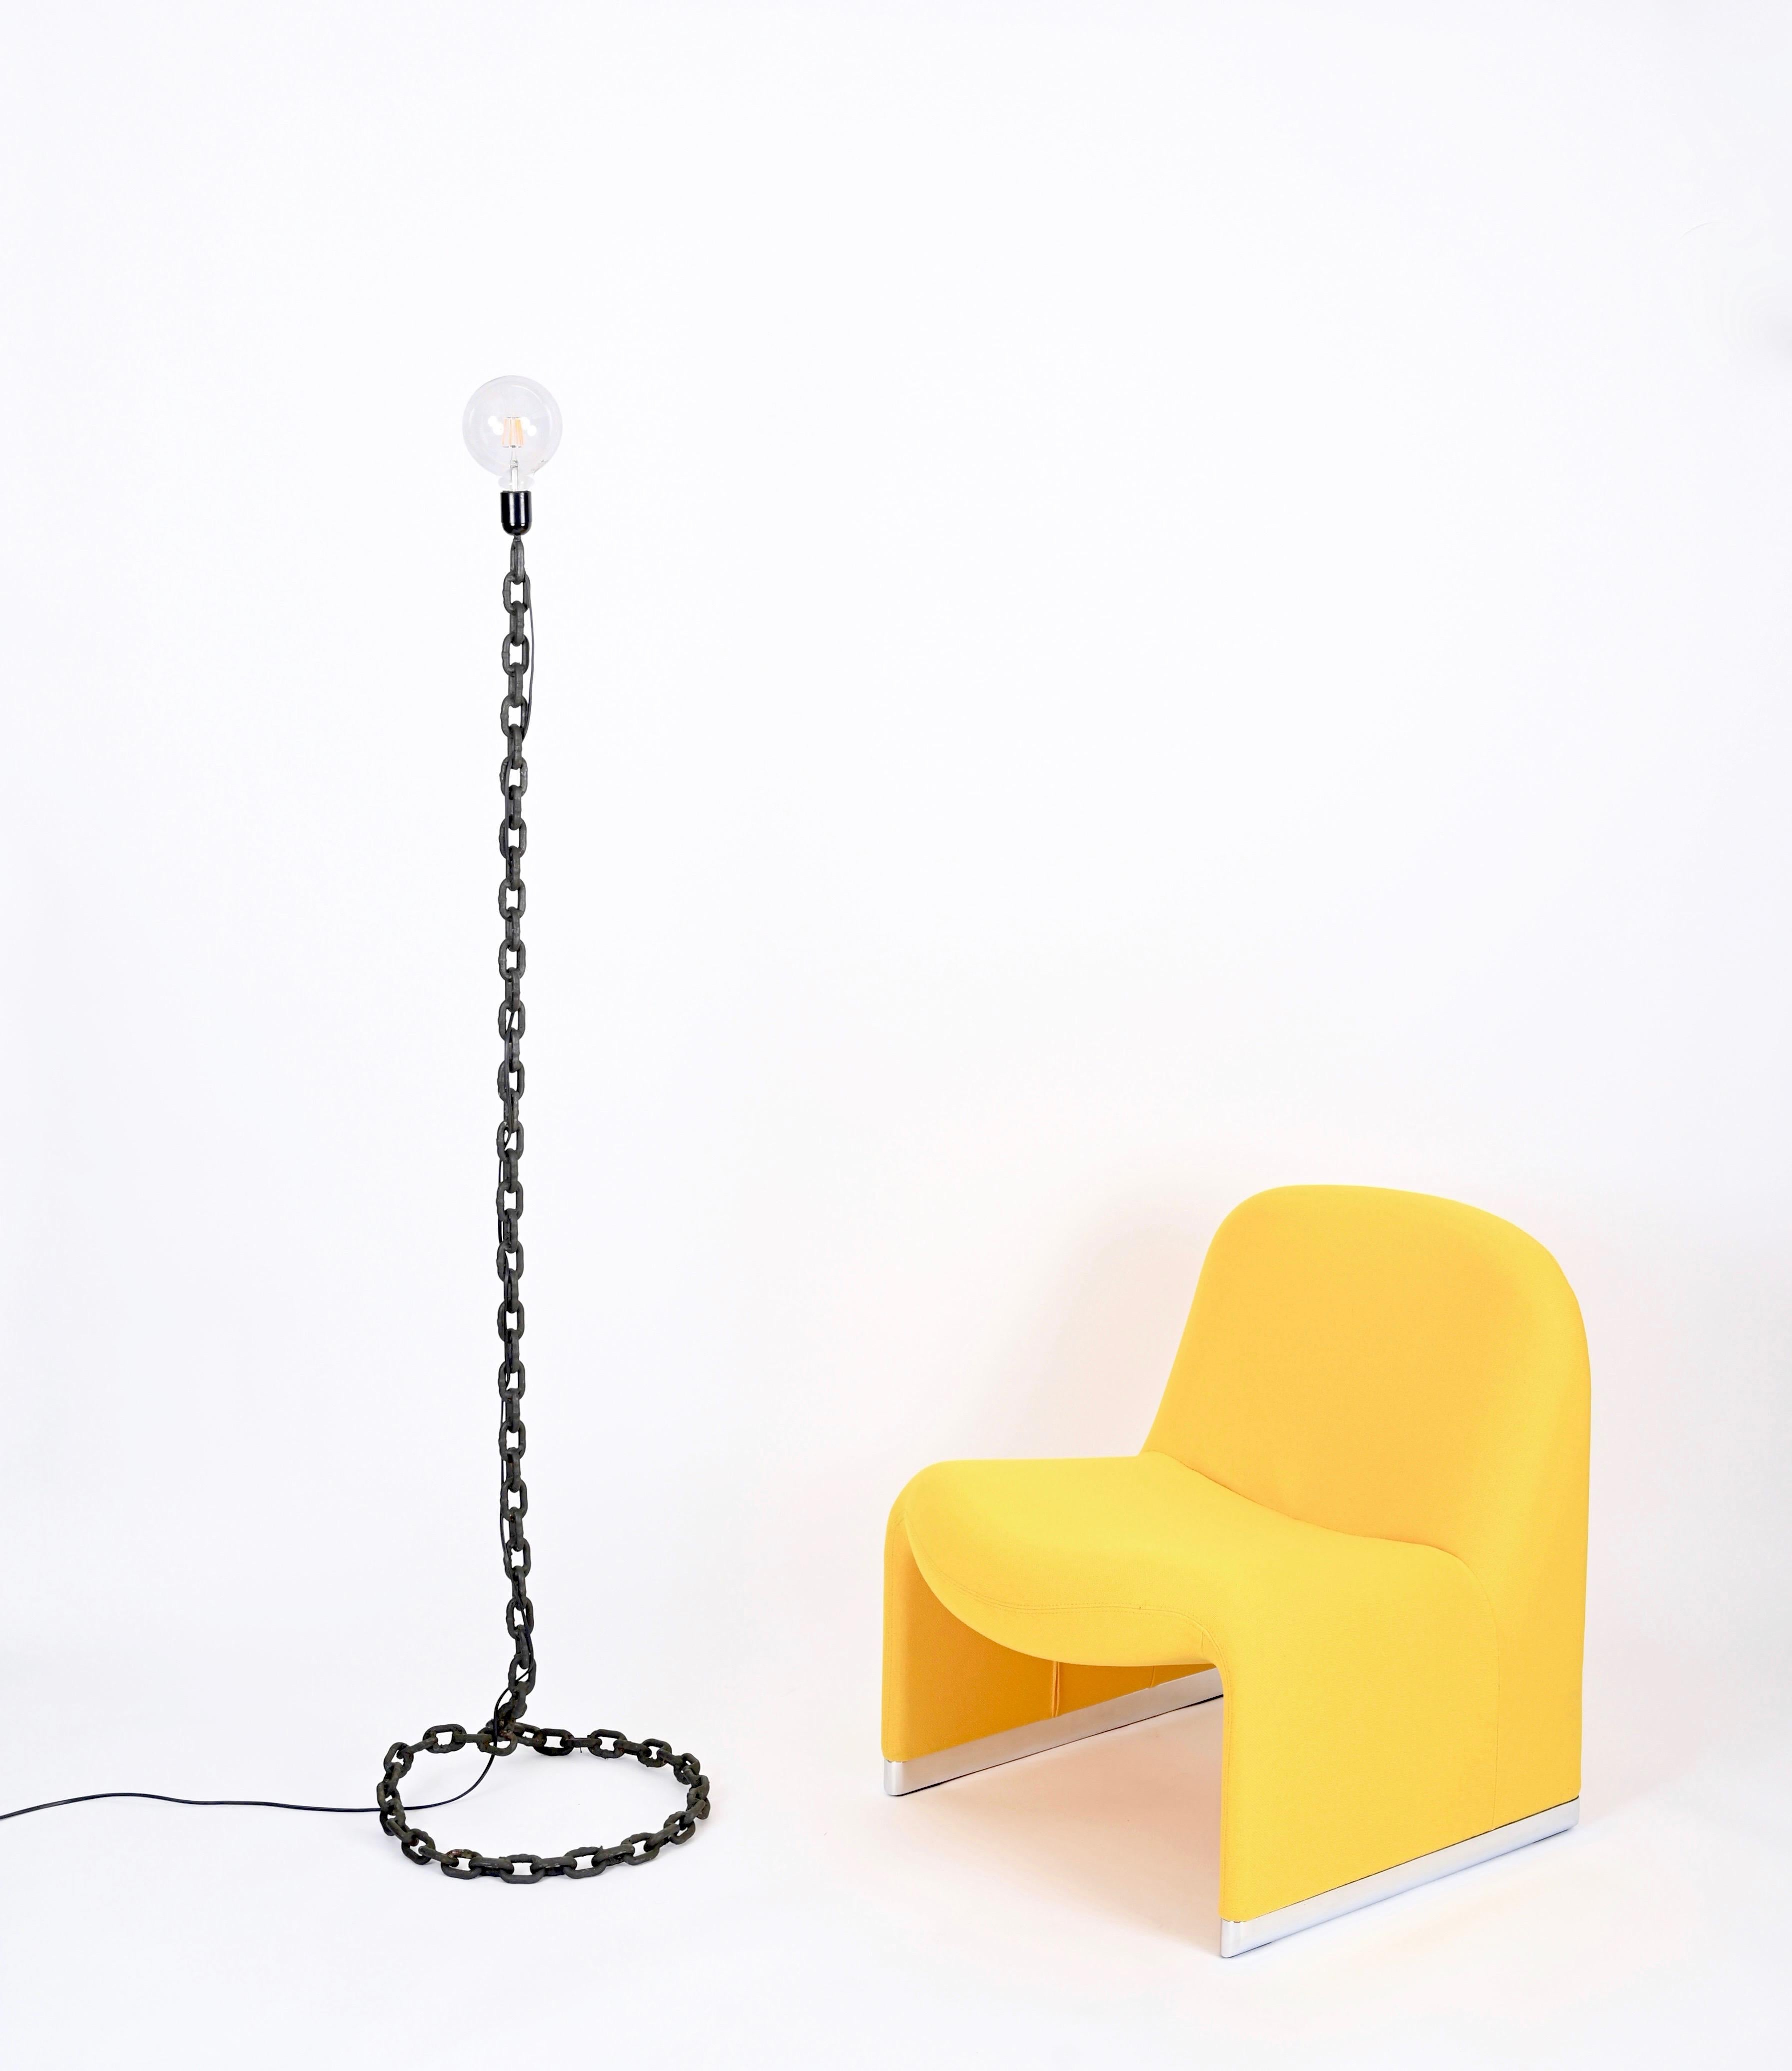 Beautiful brutalist floor lamp in the style of Franz West. This eye-catching lamp was hand-made in Italy during the 1970s, clearly in the style of Franz West. 

The lamp is made in an iron chain which is welded together and enameled in a dark